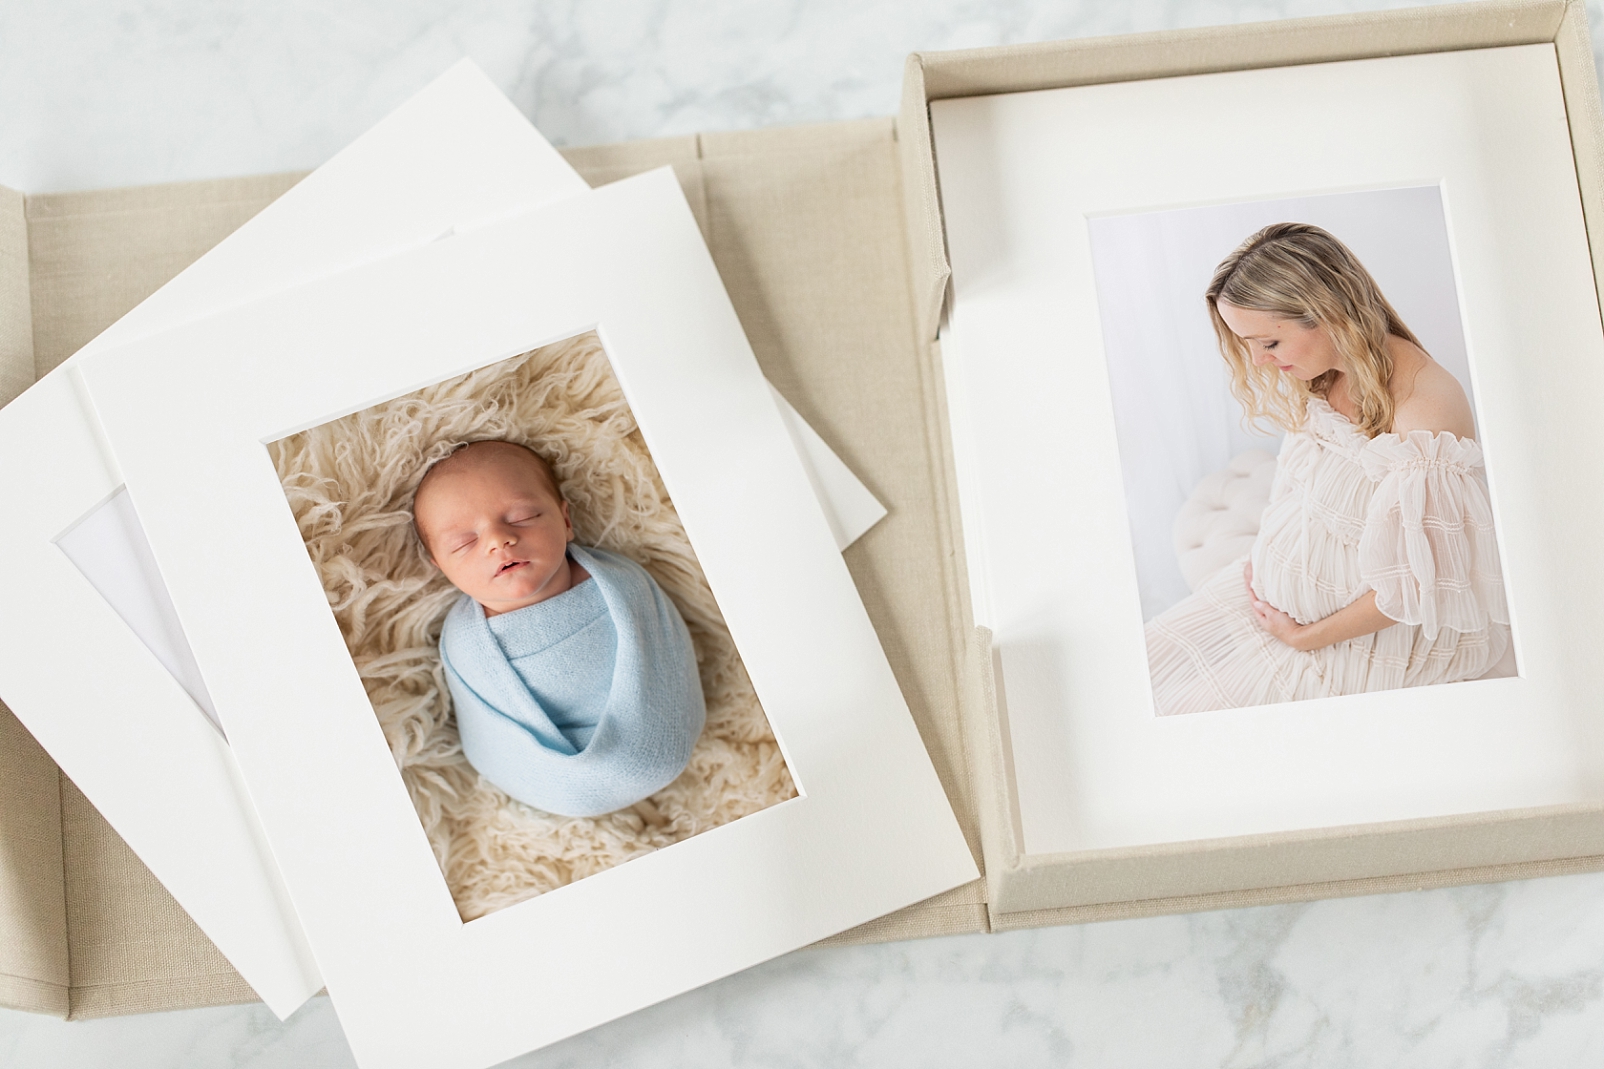 Newborn boy in light blue wrap on a flokati  featured in a white mat and a maternity photo of the mom displayed in a white mat
